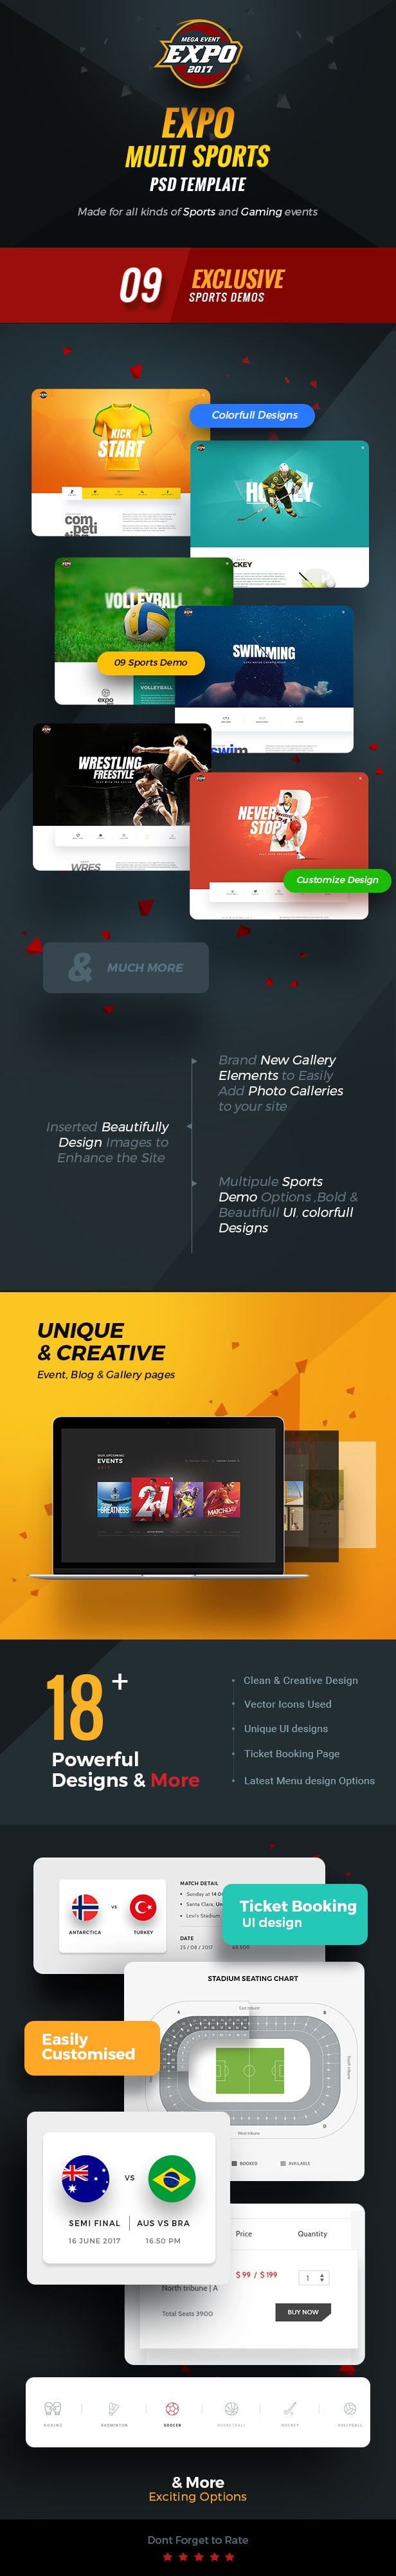 Expo - Multi Sports Event PSD Template - 1